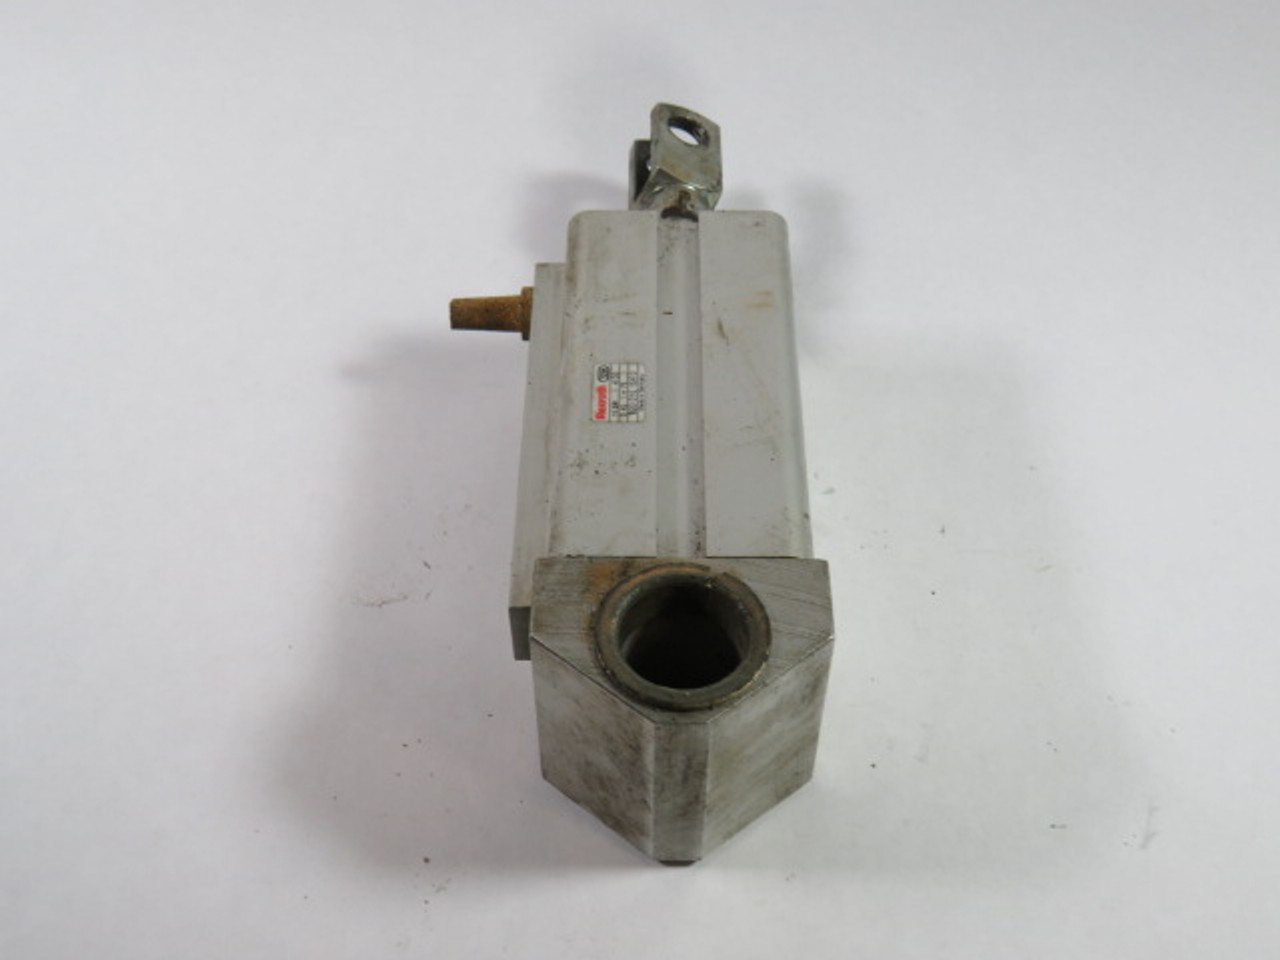 Rexroth 520-010-154-0 Pneumatic Cylinder 40mm Bore 75mm Stroke USED